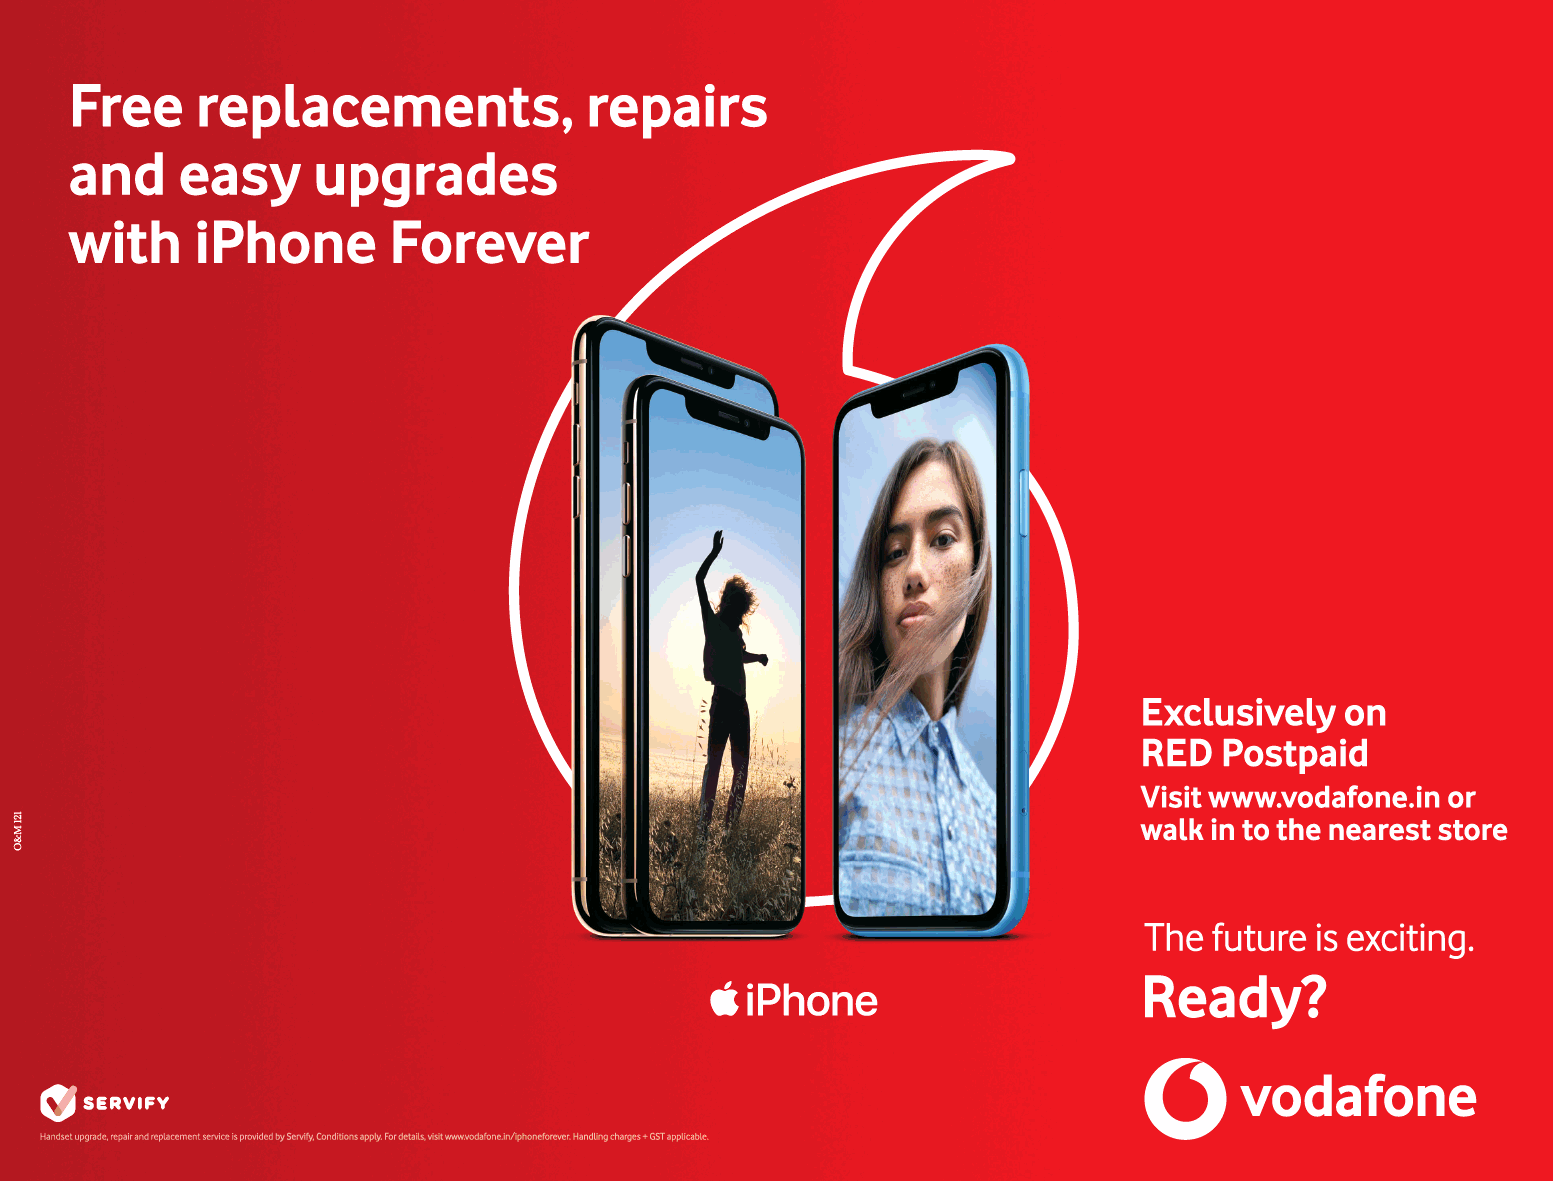 vodafone-free-replacements-repairs-and-easy-upgrades-with-iphone-forever-ad-times-of-india-delhi-16-05-2019.png